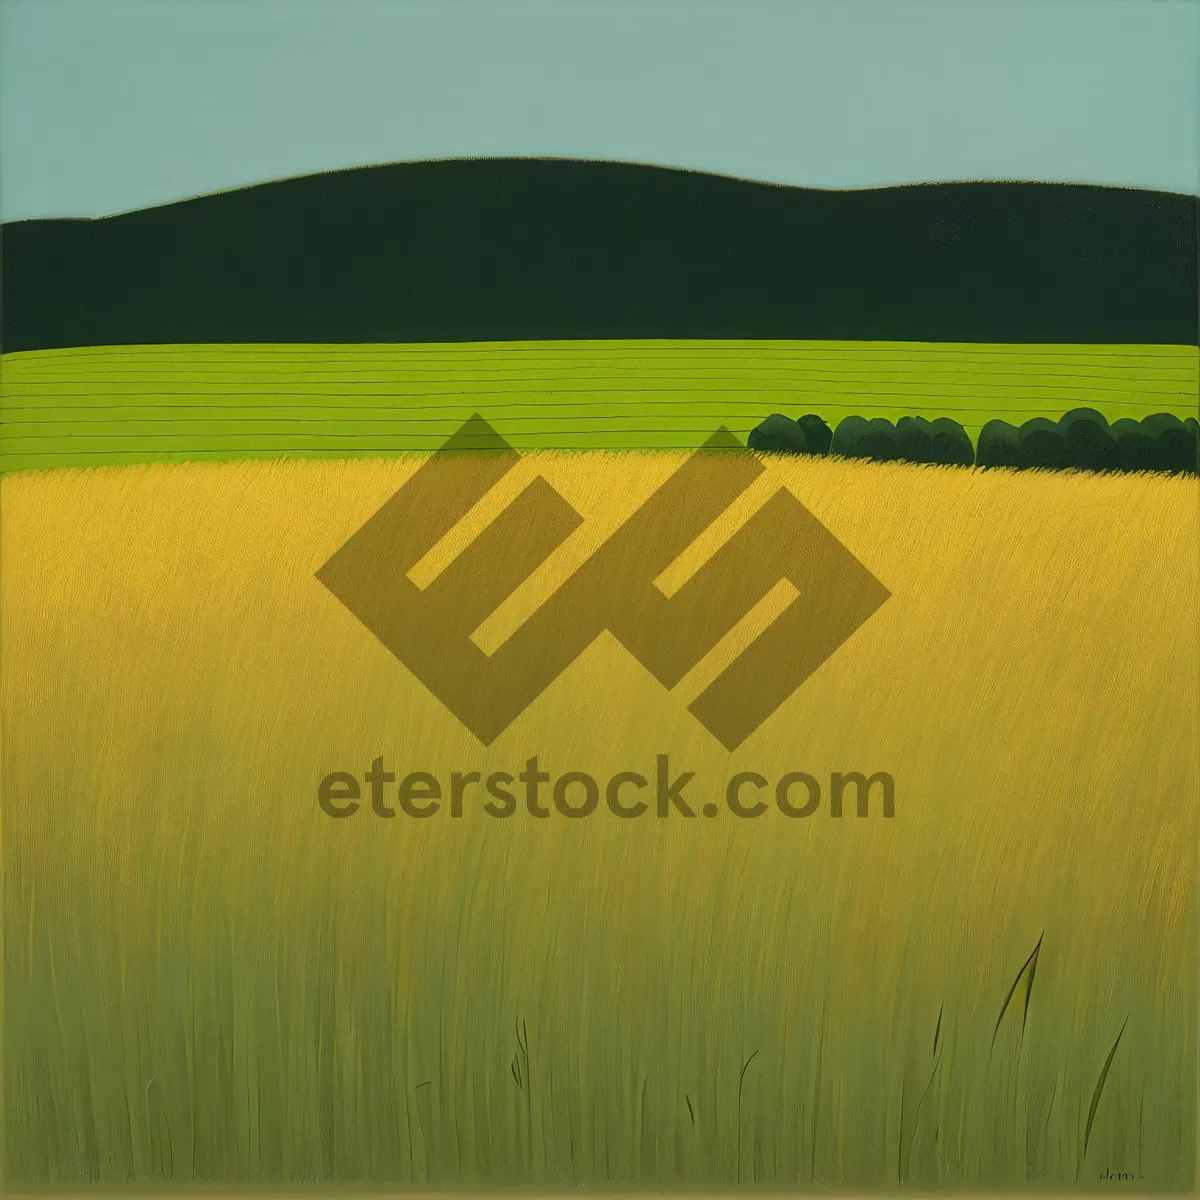 Picture of Golden fields beneath a blue sky